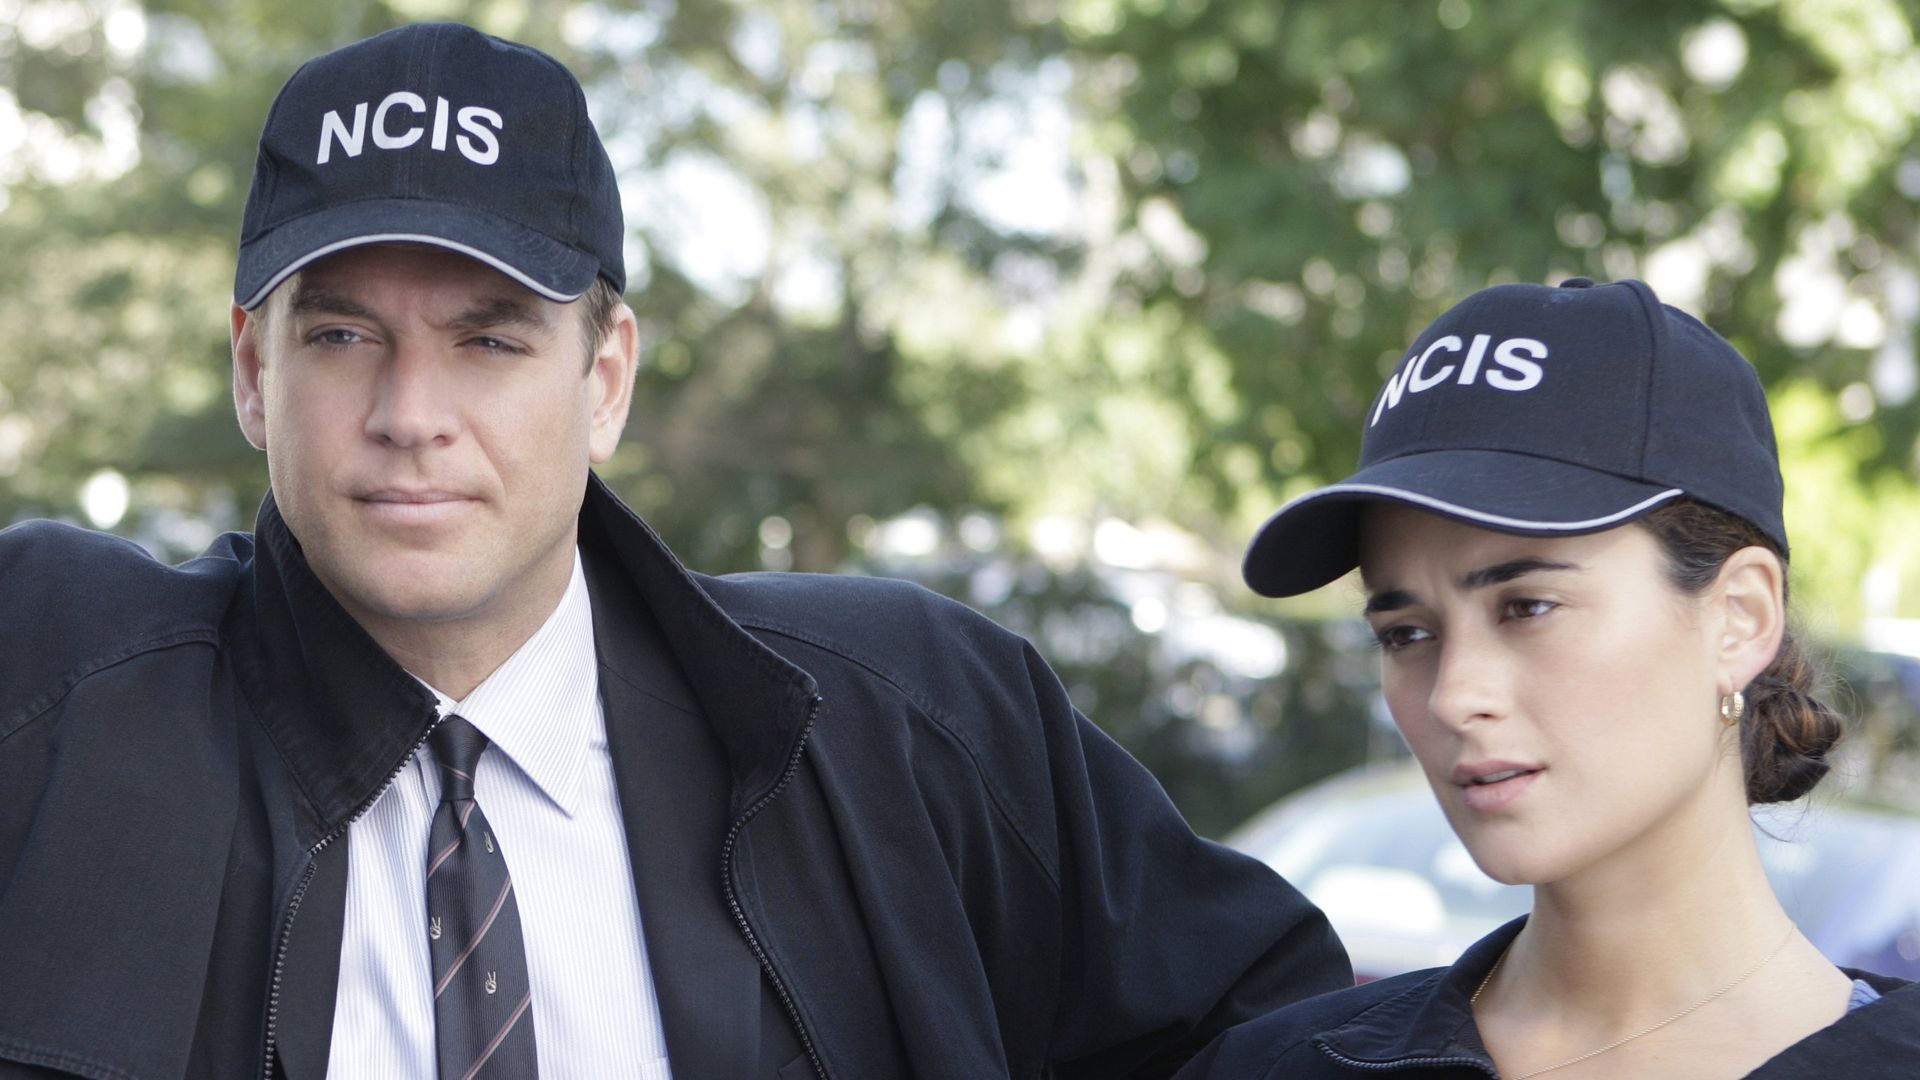 NCIS star Michael Weatherly shares exciting new update on upcoming Tony/Ziva spin-off – details